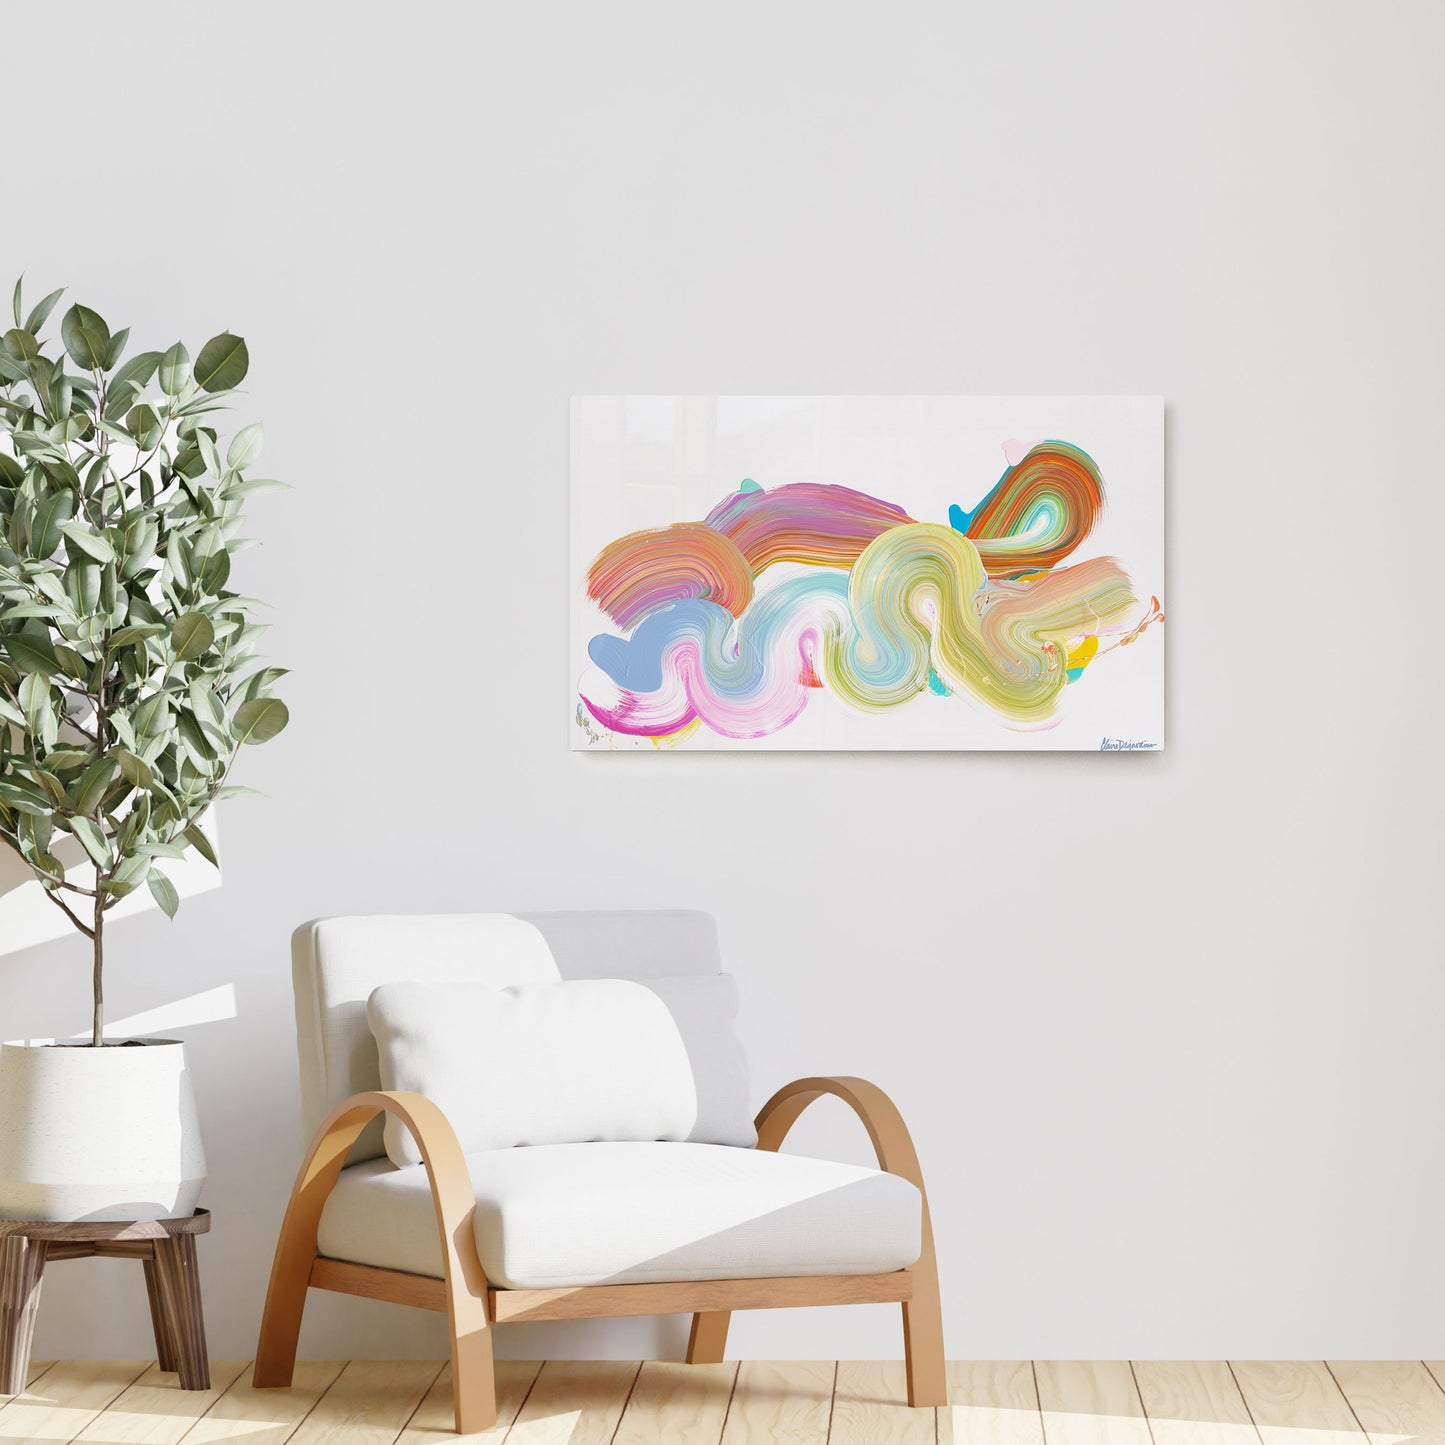 Claire Desjardins' Curled Up in You painting reproduced on HD metal print and displayed on wall